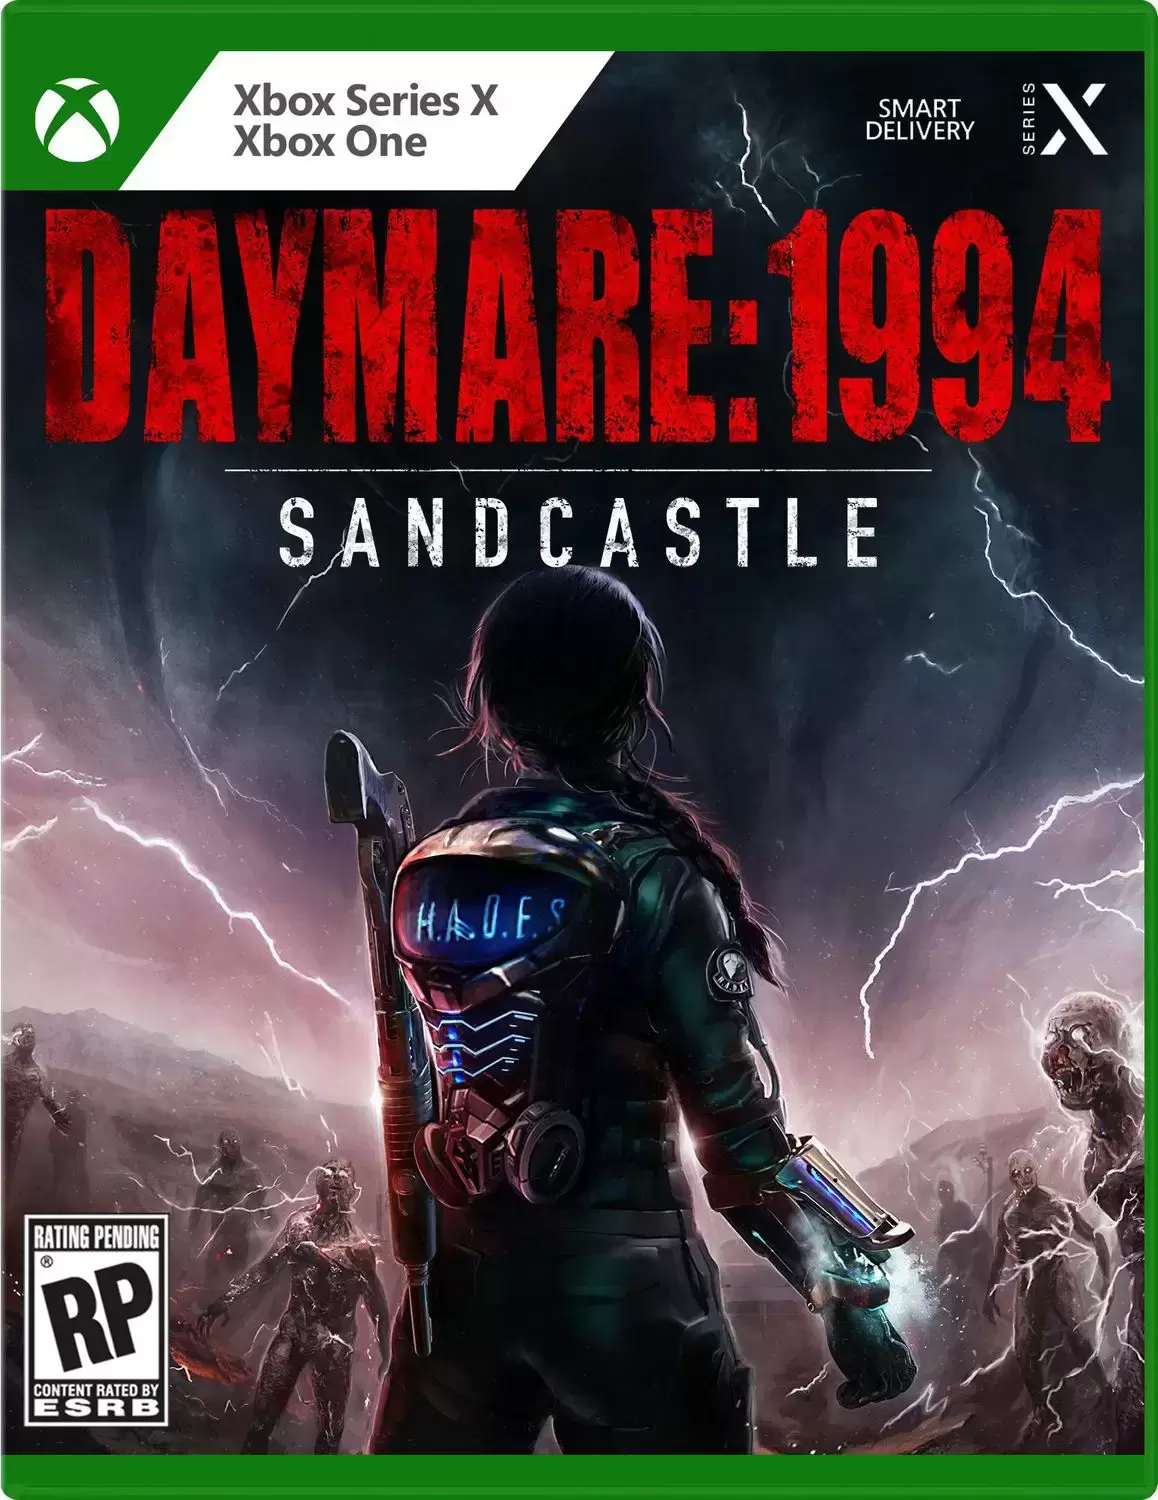 Jeux XBOX One - Daymare 1994 Sandcastle